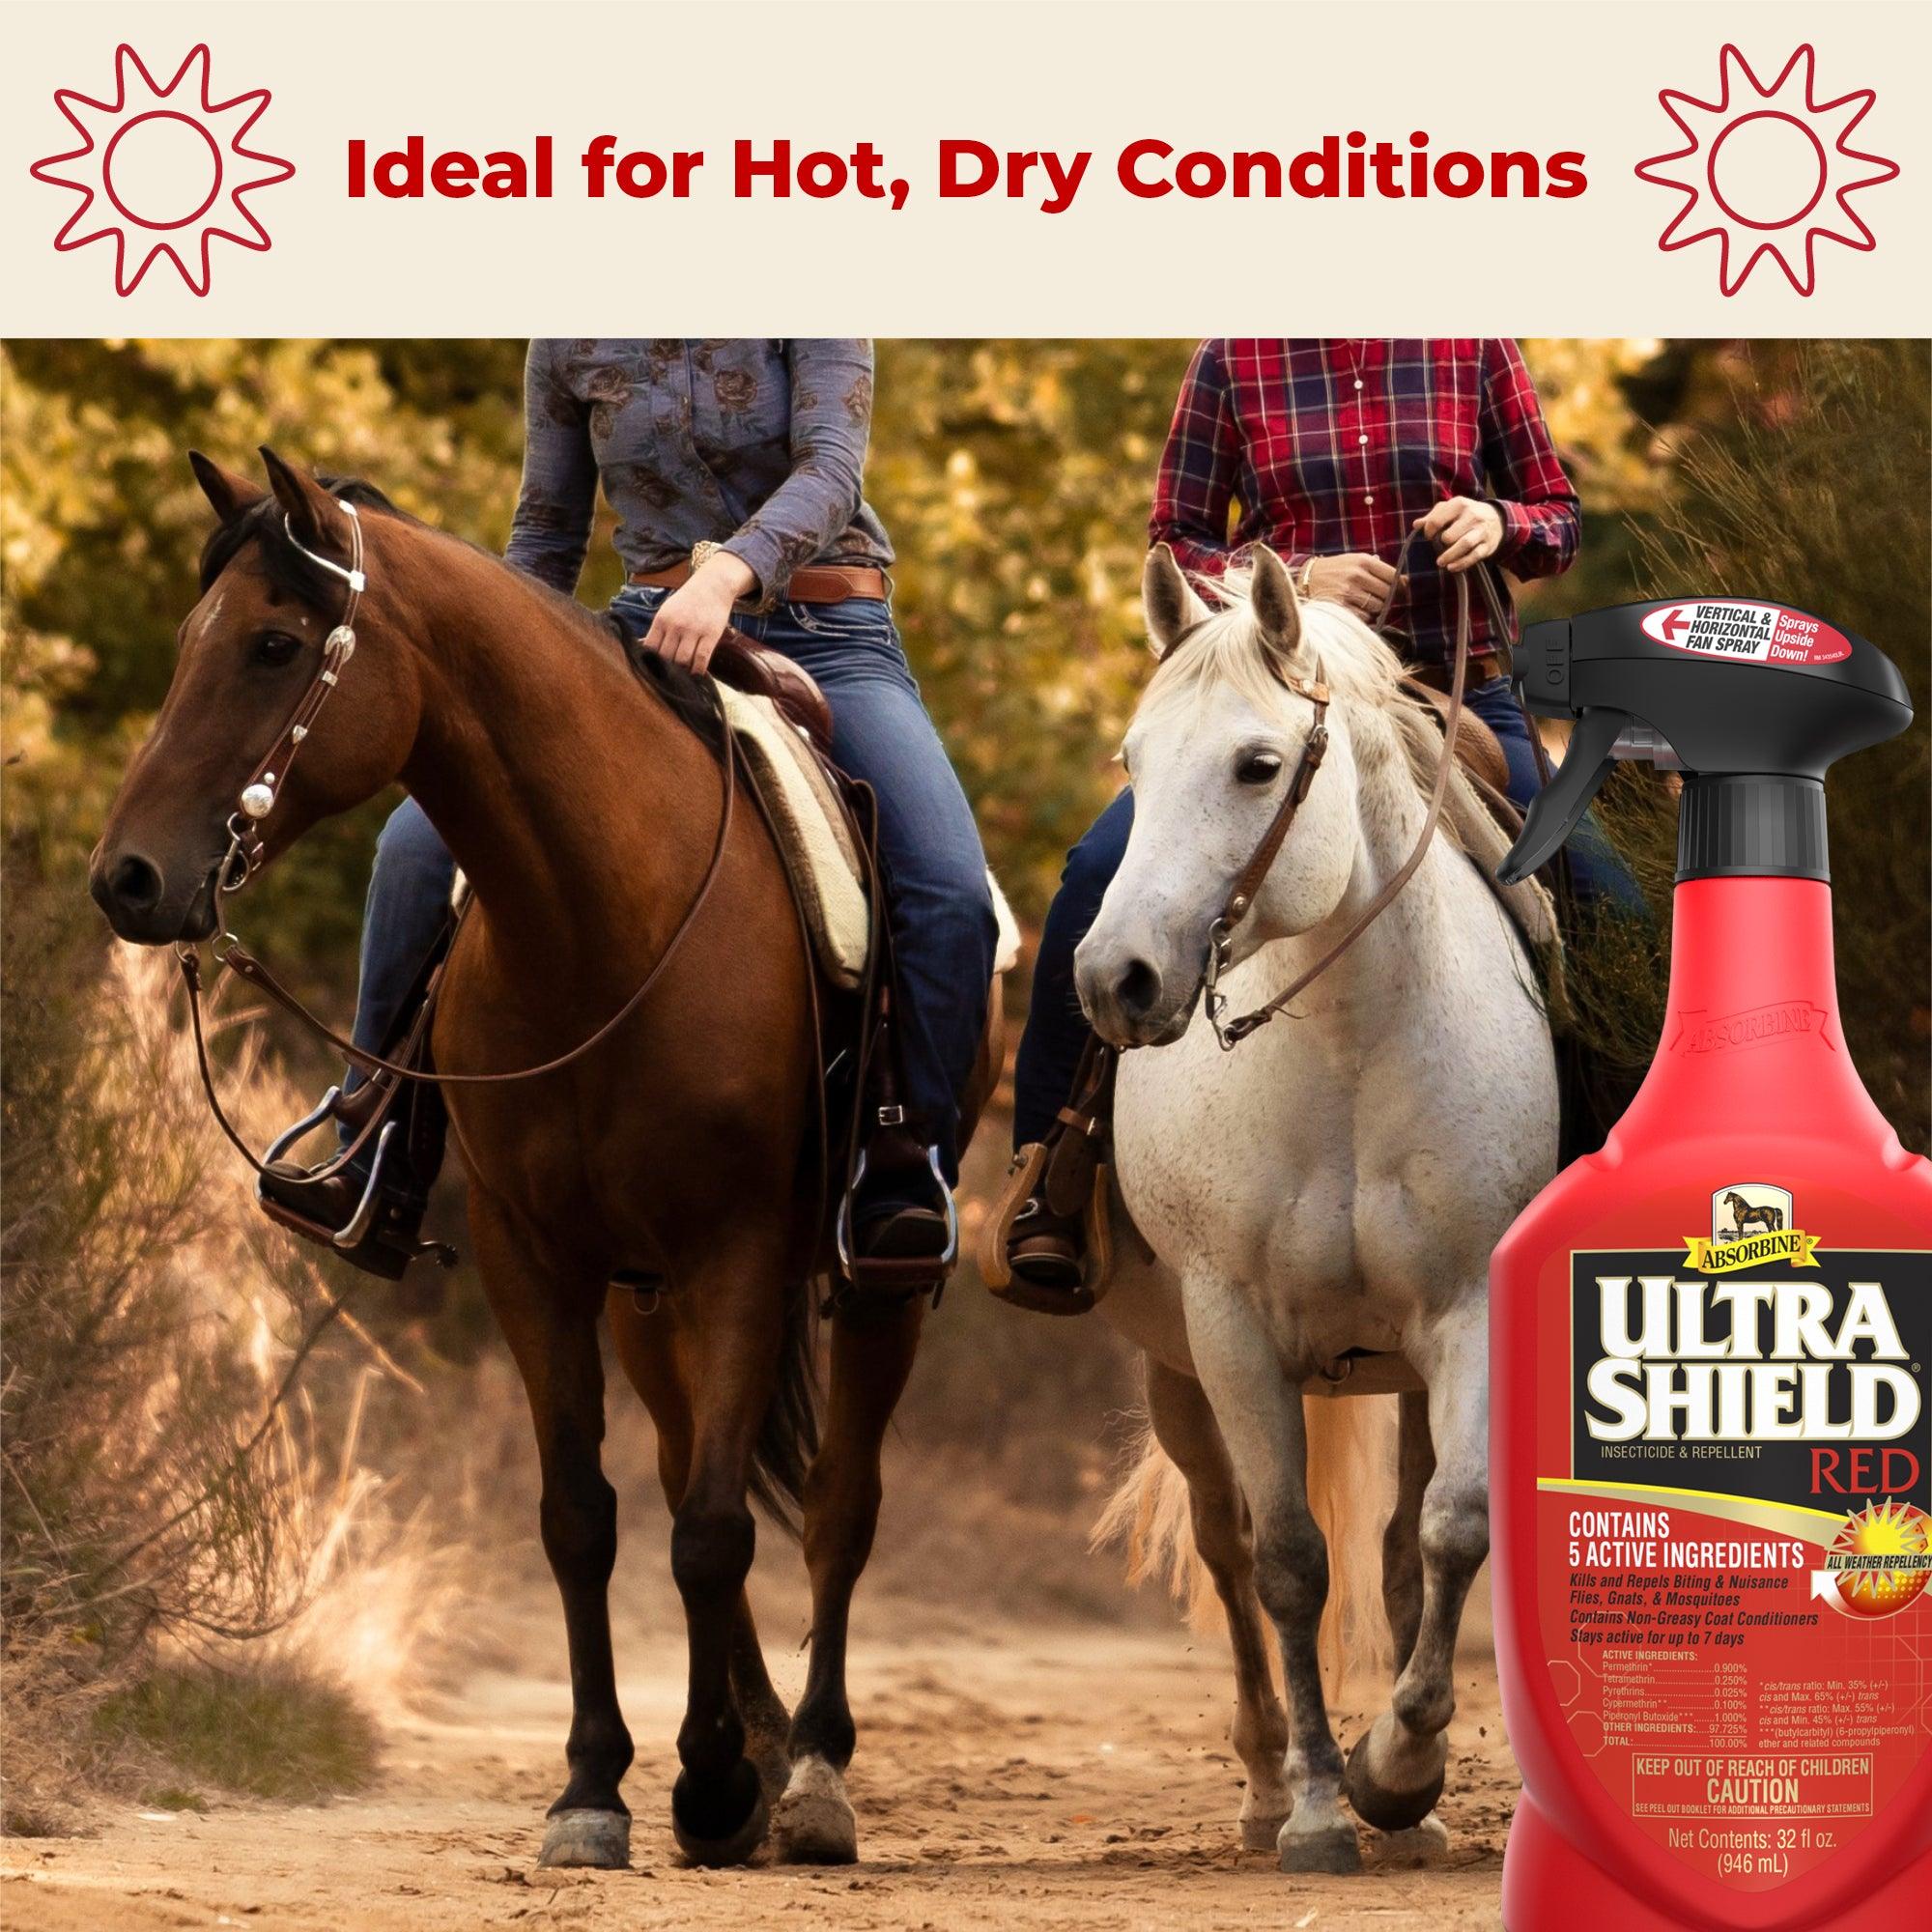 Absorbine Ultrashield Red Insecticide & Repellent - 32 oz